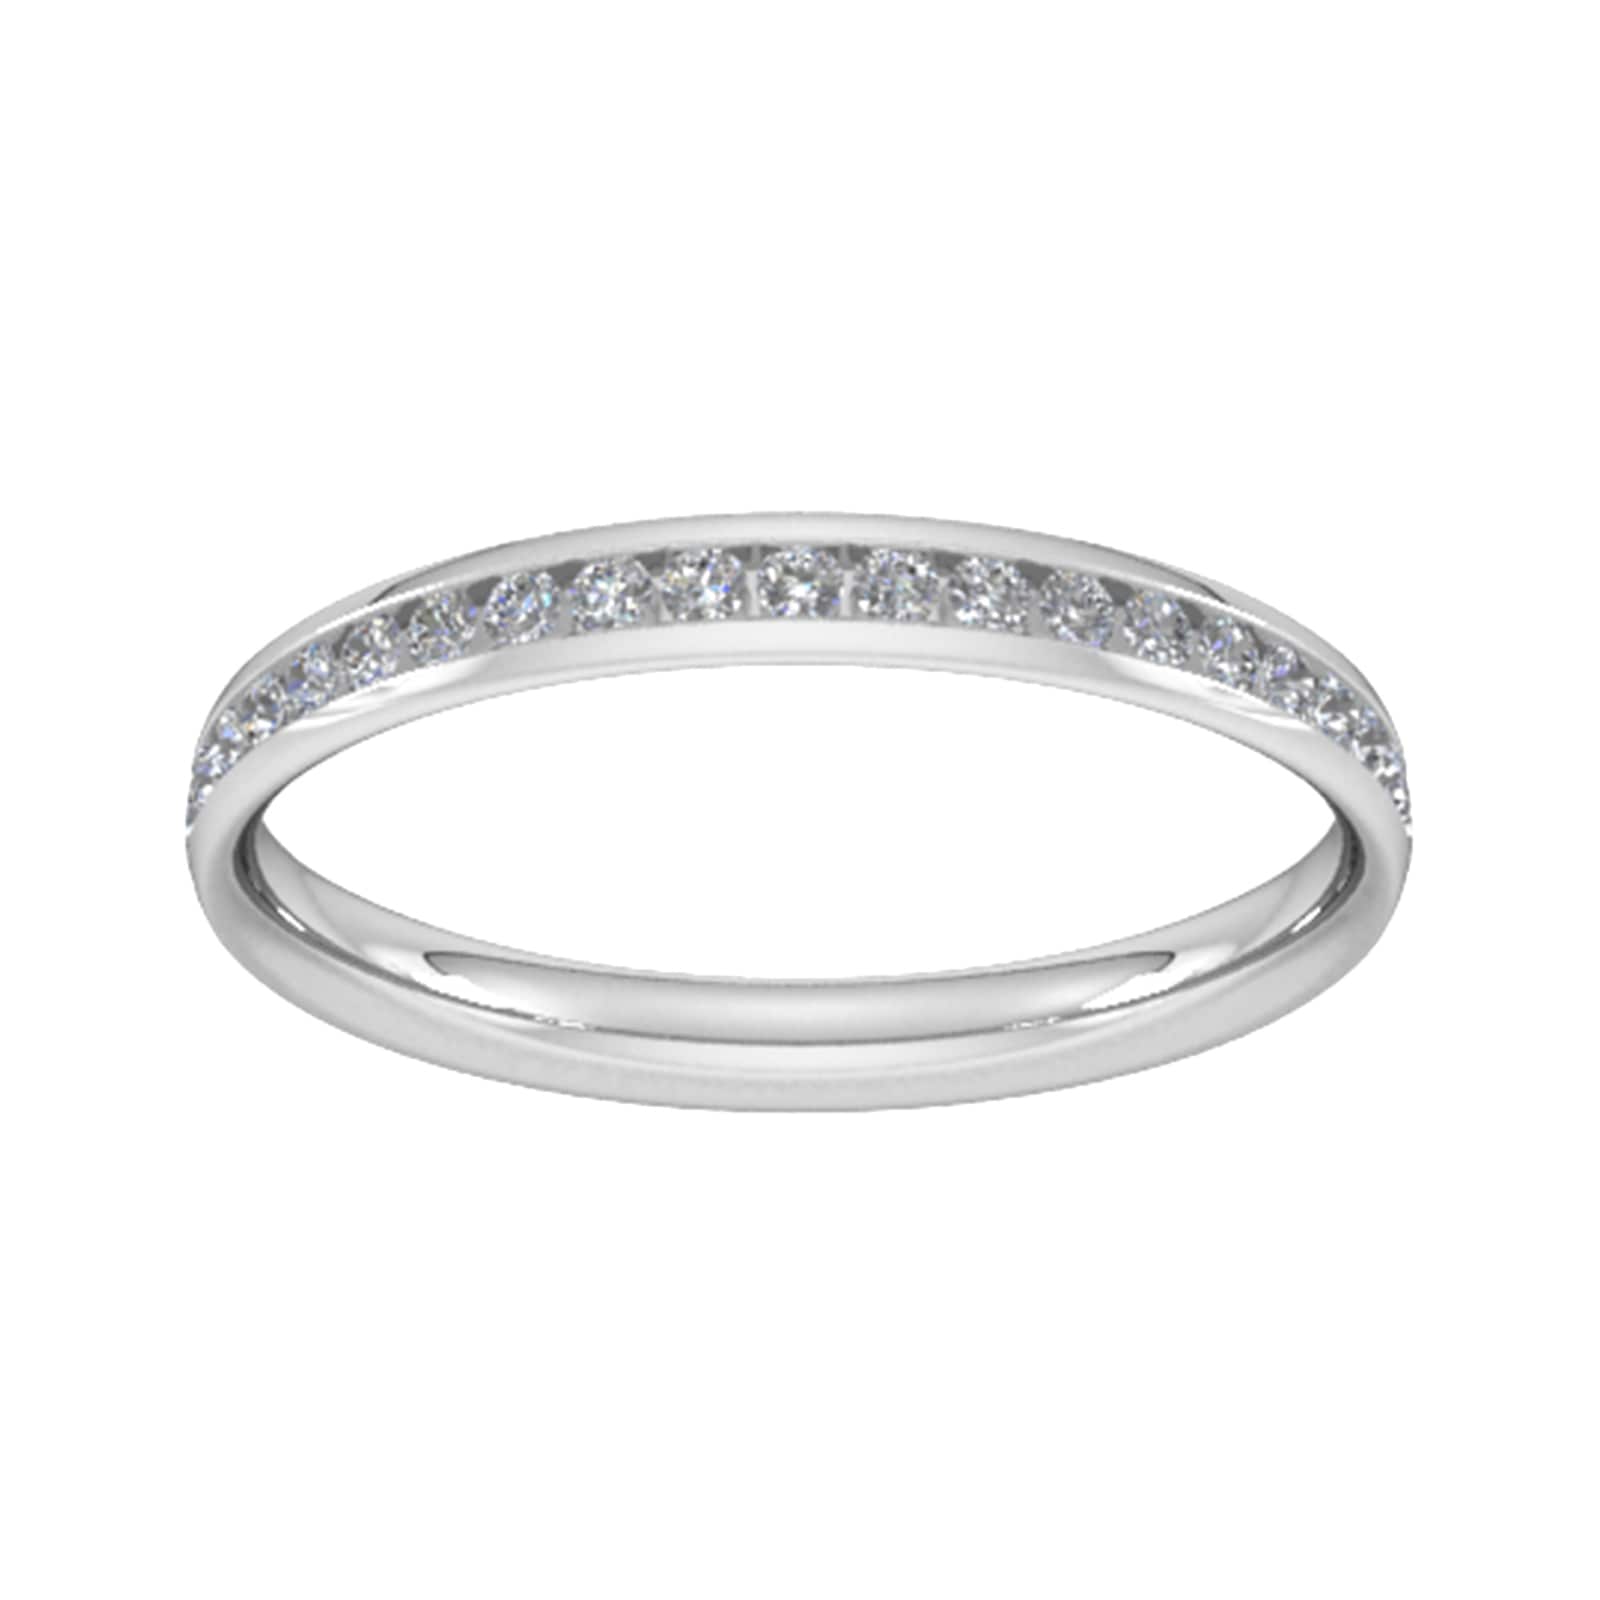 0.21 Carat Total Weight Half Channel Set Brilliant Cut Diamond Wedding Ring In 9 Carat White Gold - Ring Size Y